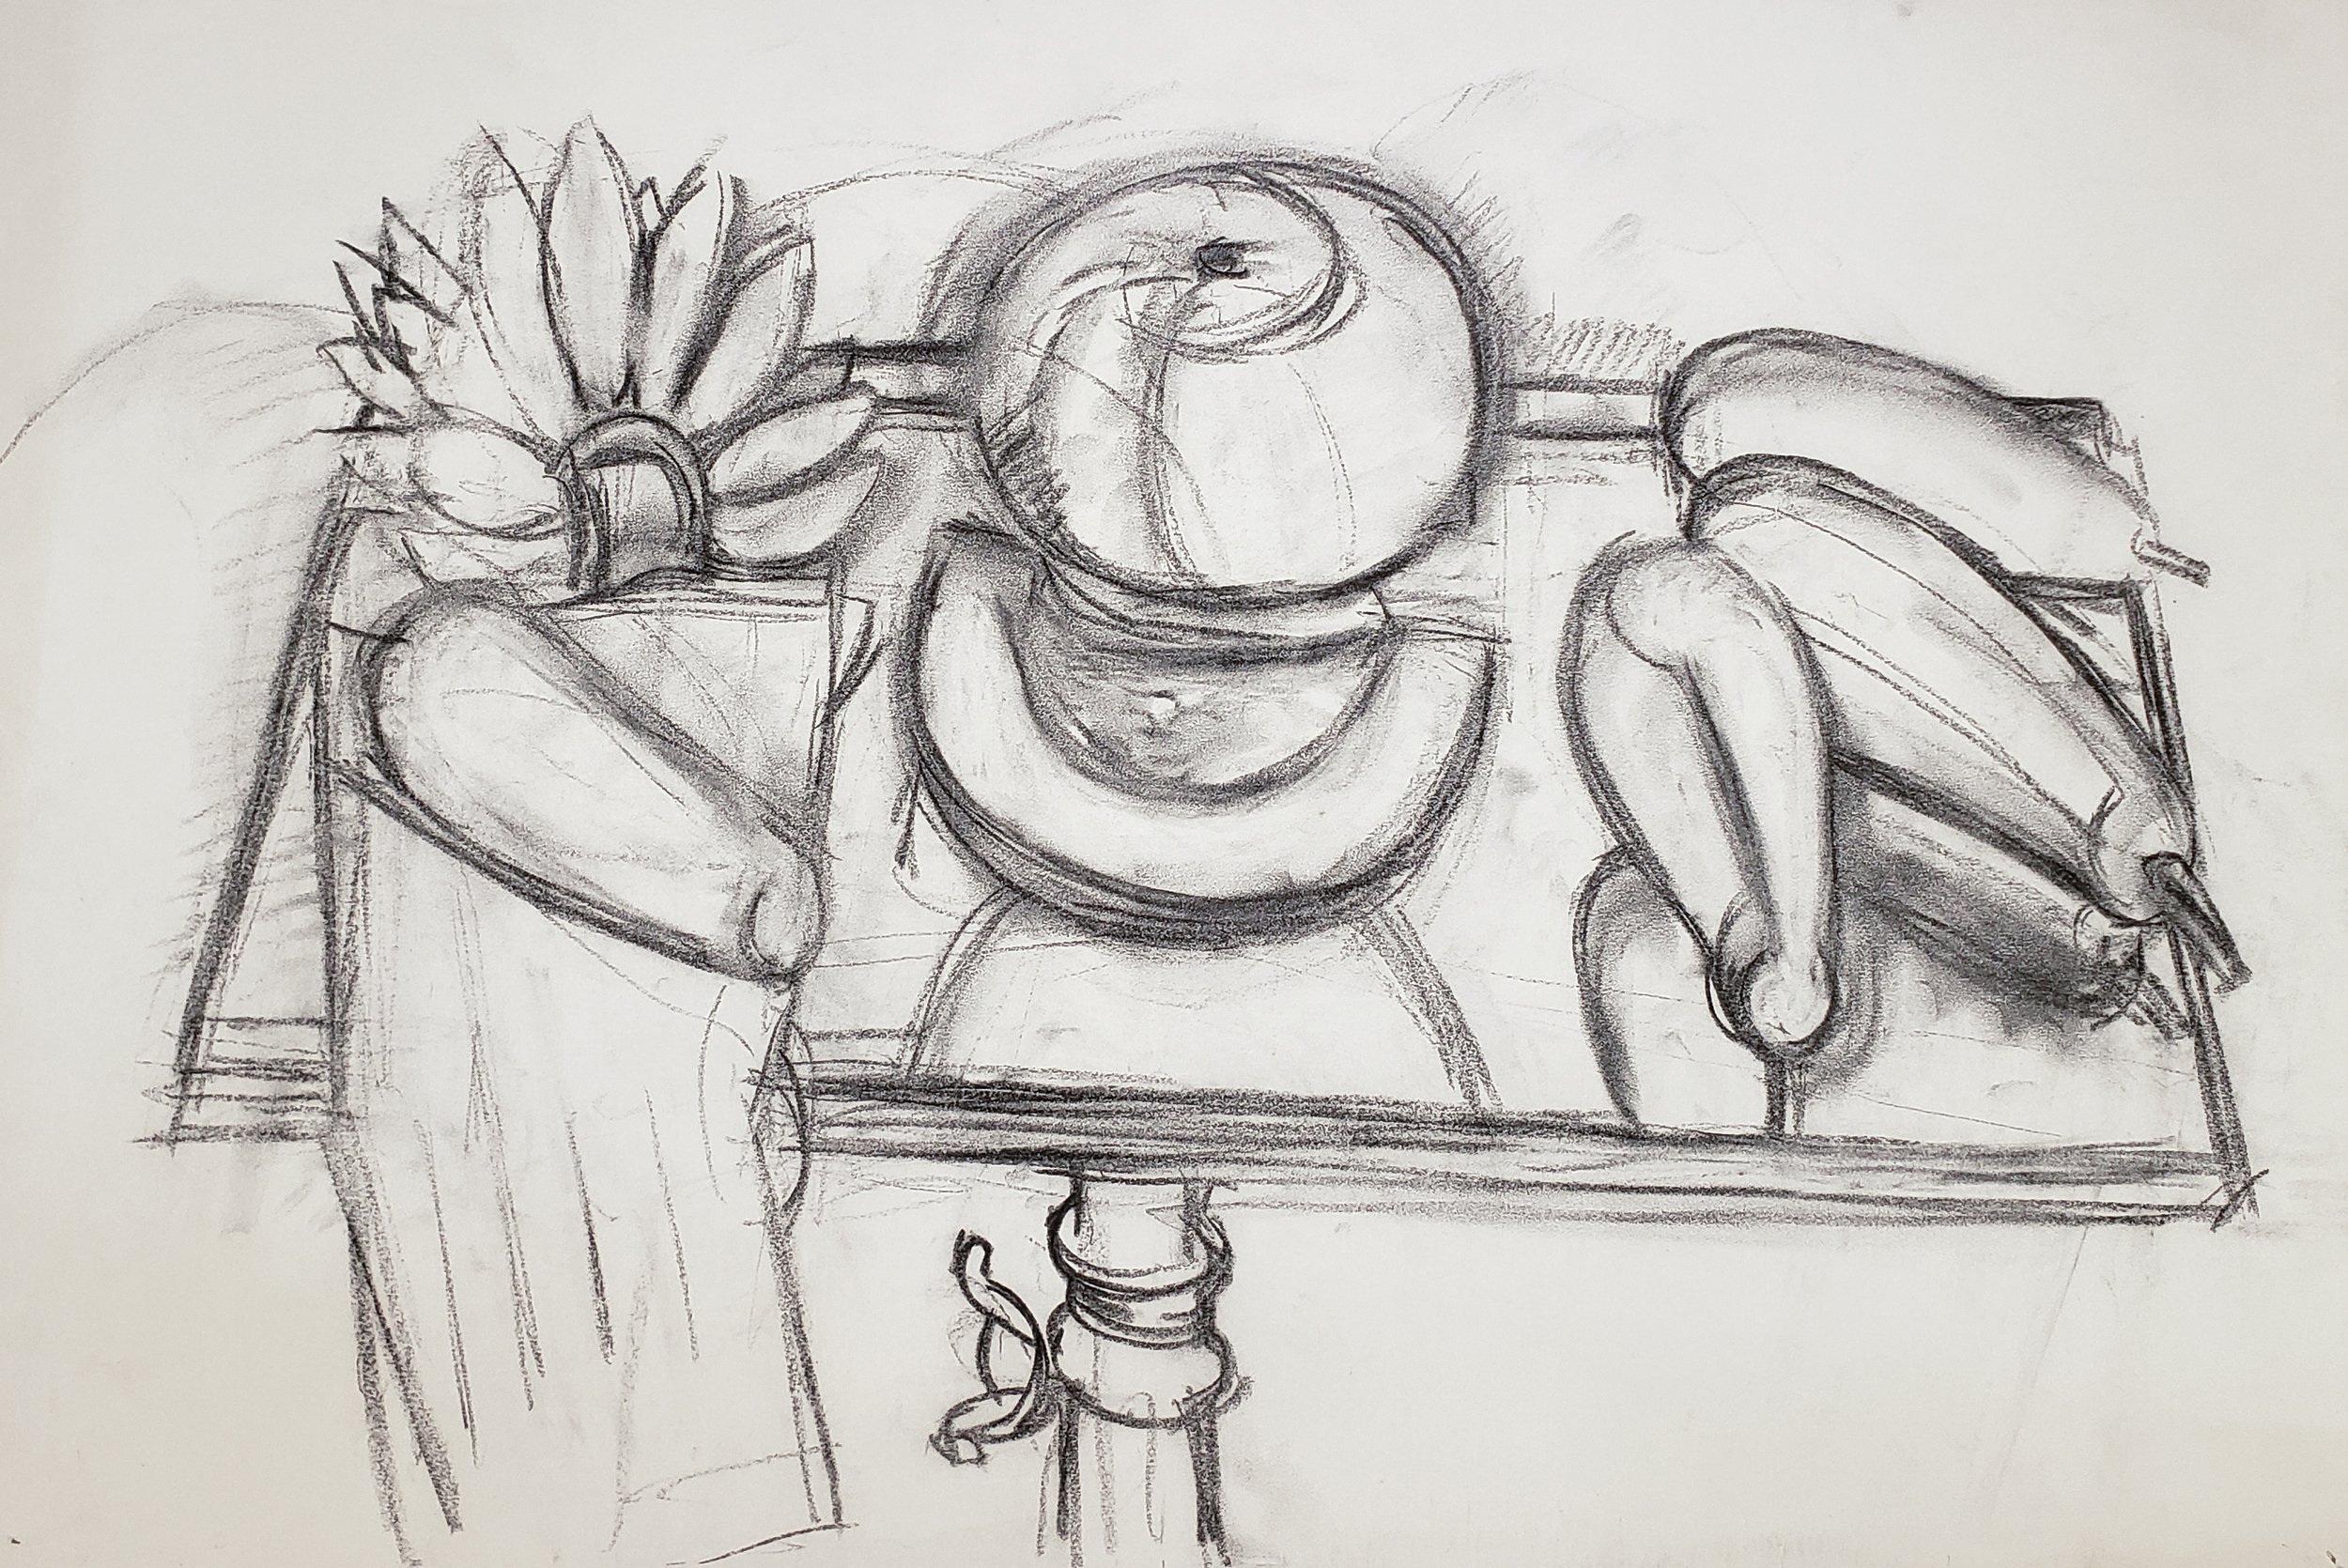   Bananas and Squashes on Black Drawing Table (study) , c. 2003, charcoal/paper unmounted, 22 x 30 in., $450 